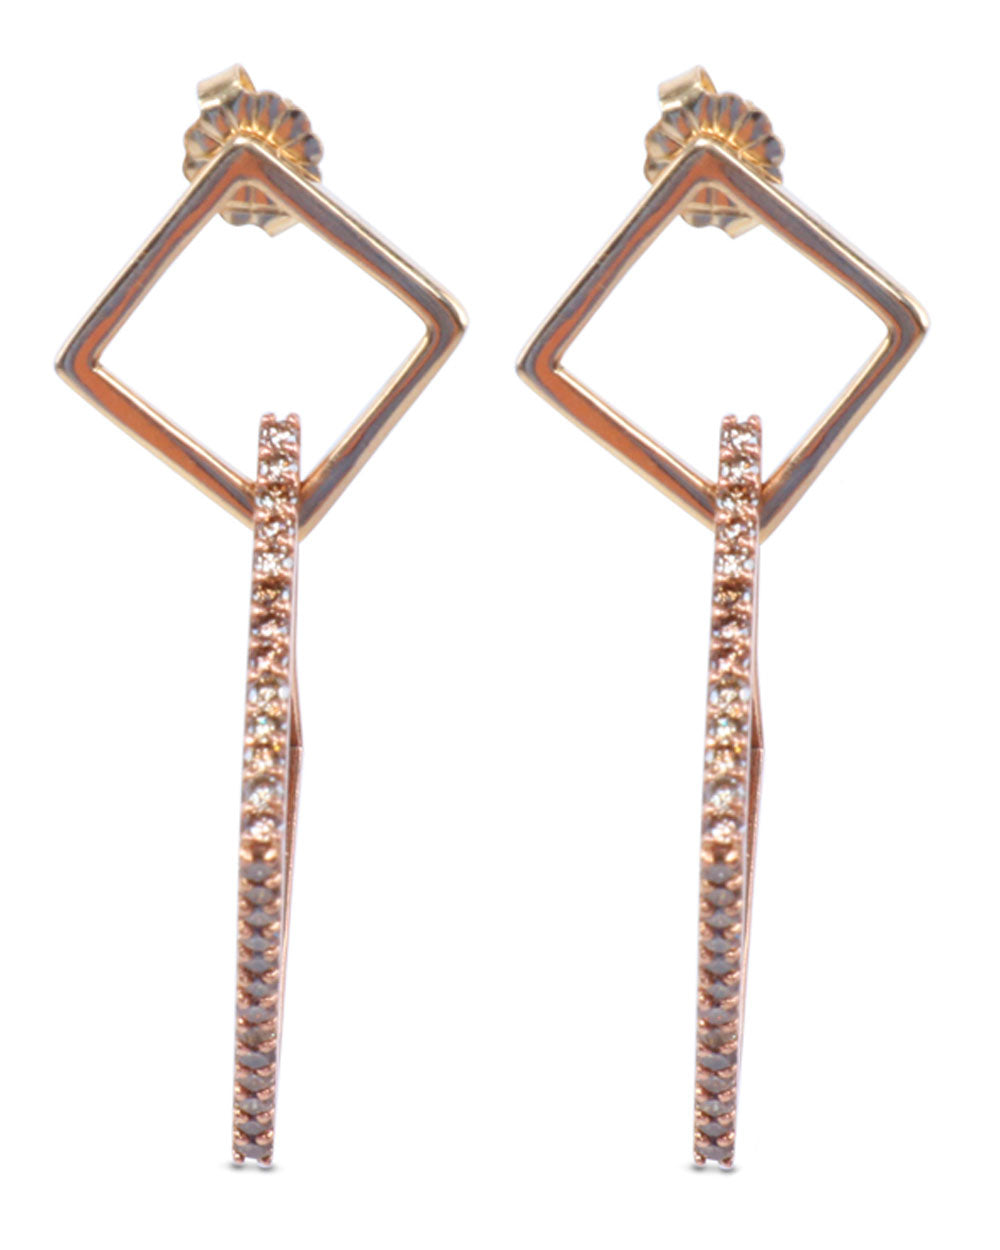 Gold and Rose Gold Diamond Puzzle Earrings